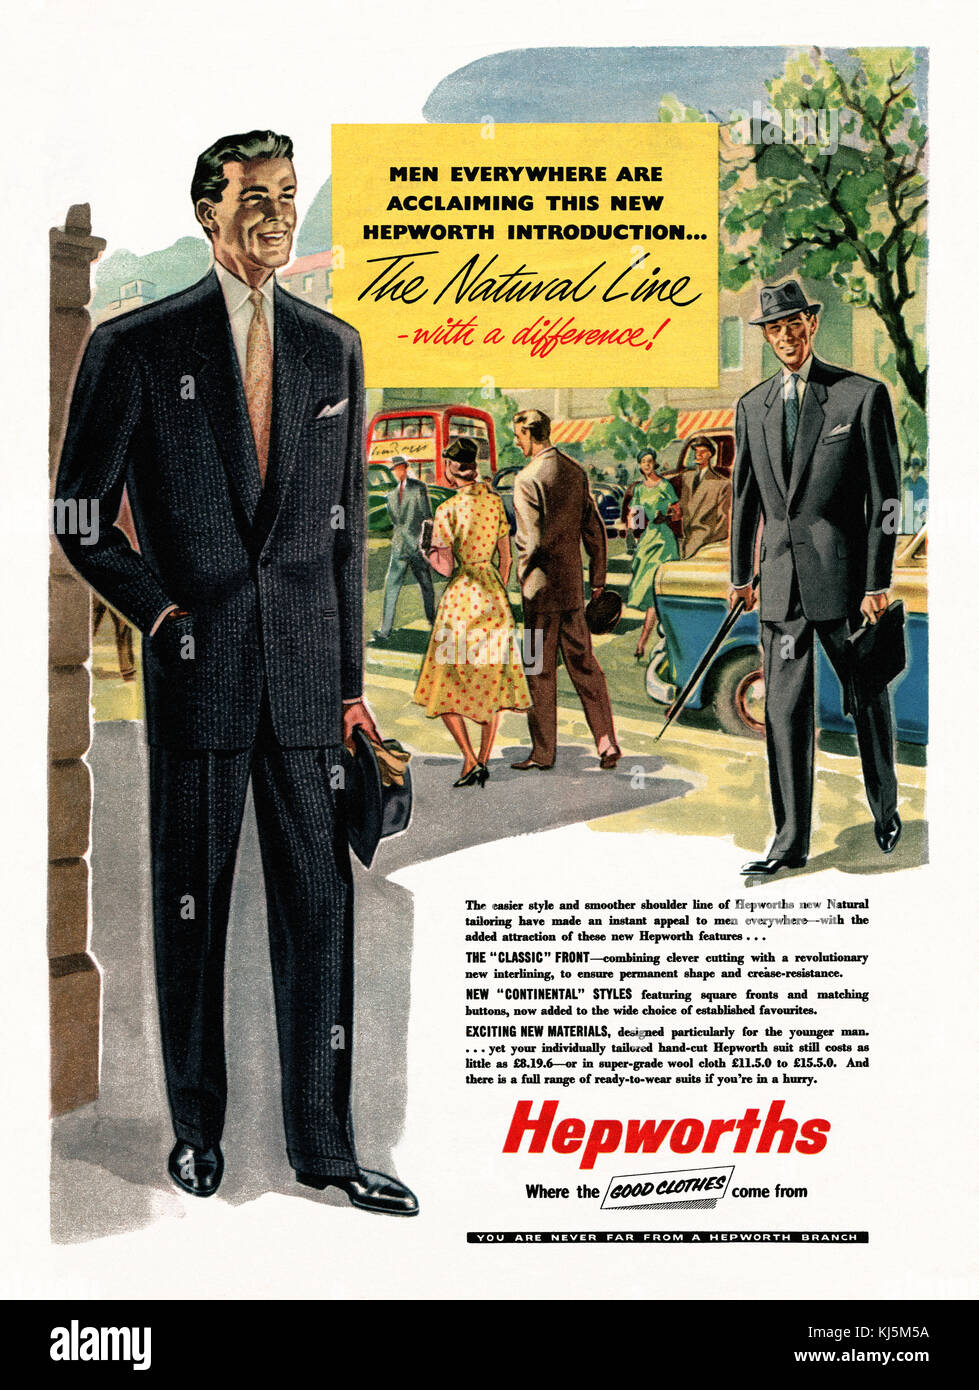 A 1957 advert for Hepworth's men's clothes with an illustration of men wearing smart business suits in a British high street Stock Photo